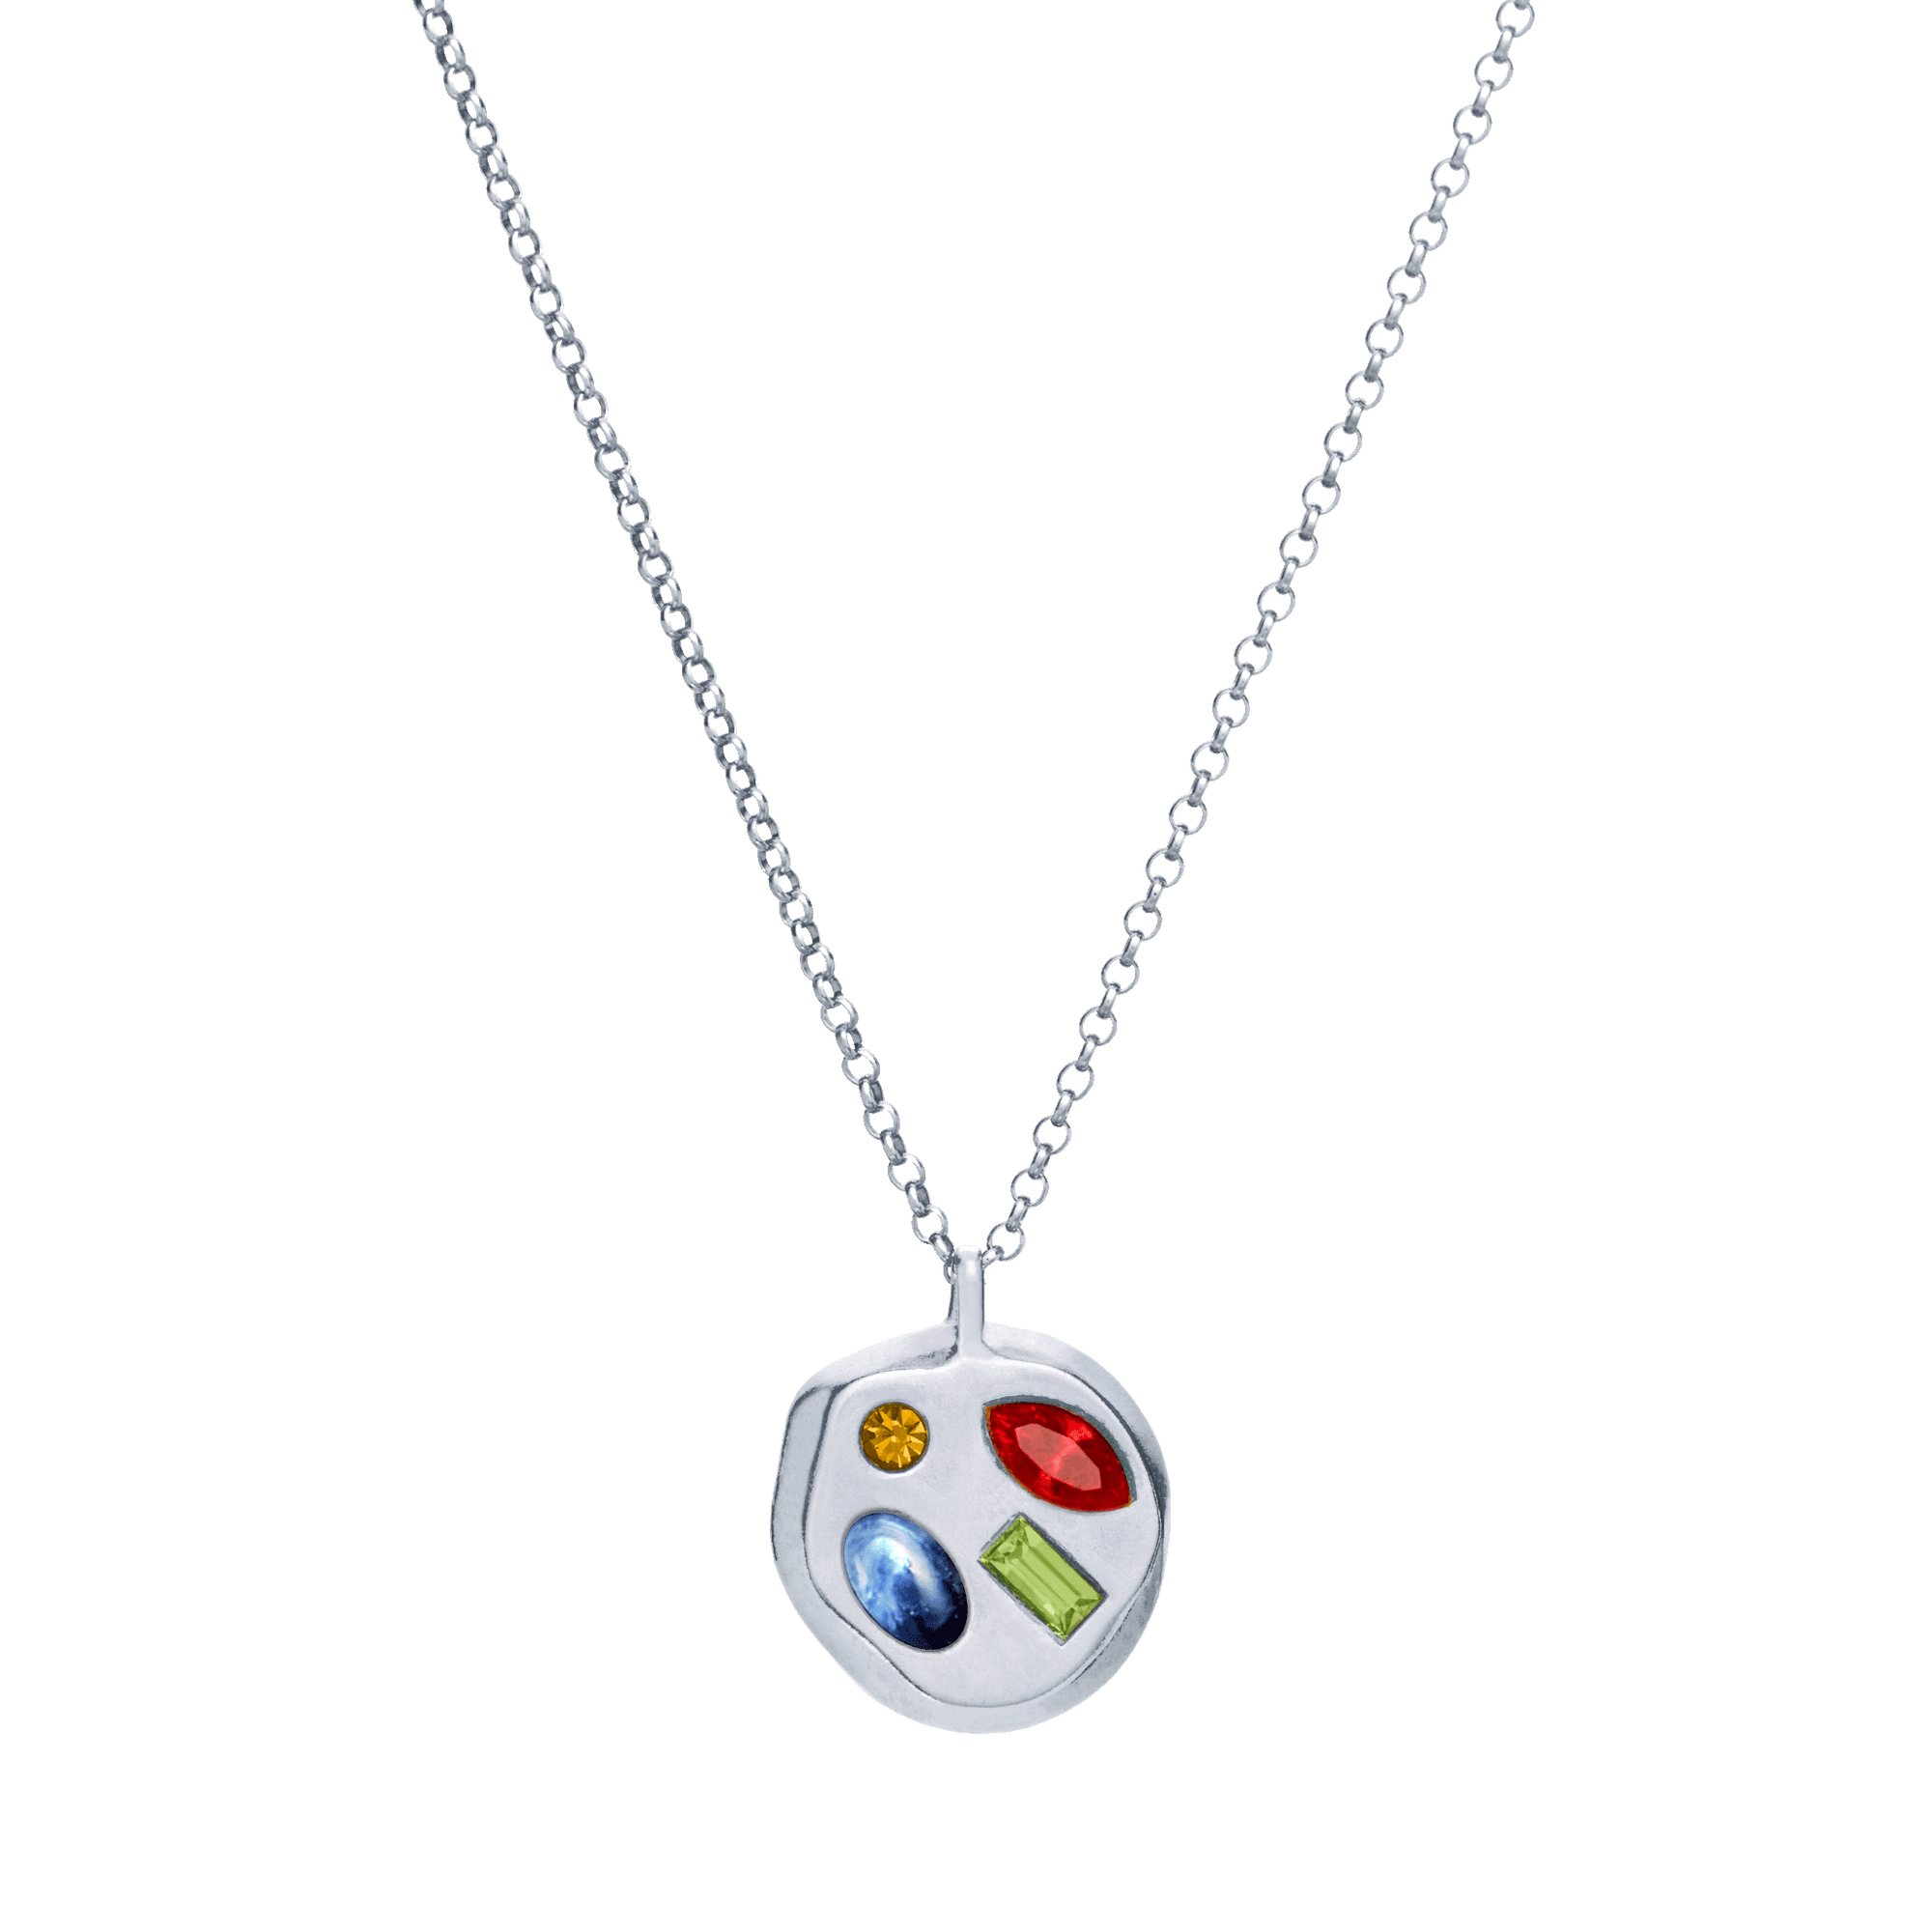 The July Eighth Pendant in Sterling Silver